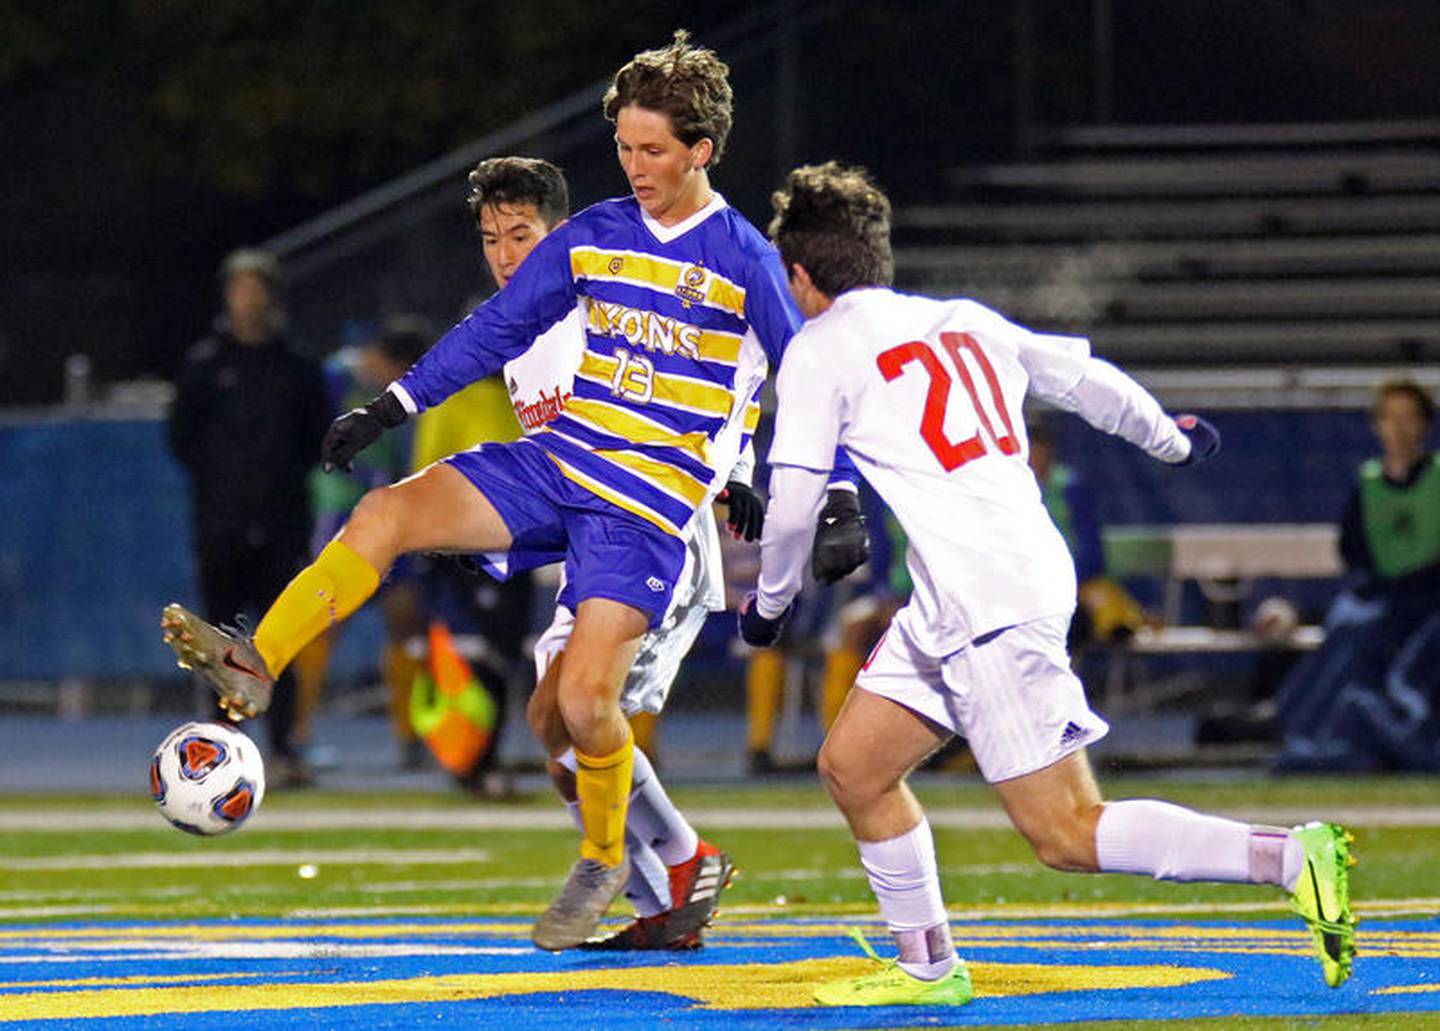 Lyons Township's Jackson Turner (13) controls the ball during the IHSA class 3A Lyons Township sectional semifinal against Hinsdale Central in Western Springs on Oct. 29.